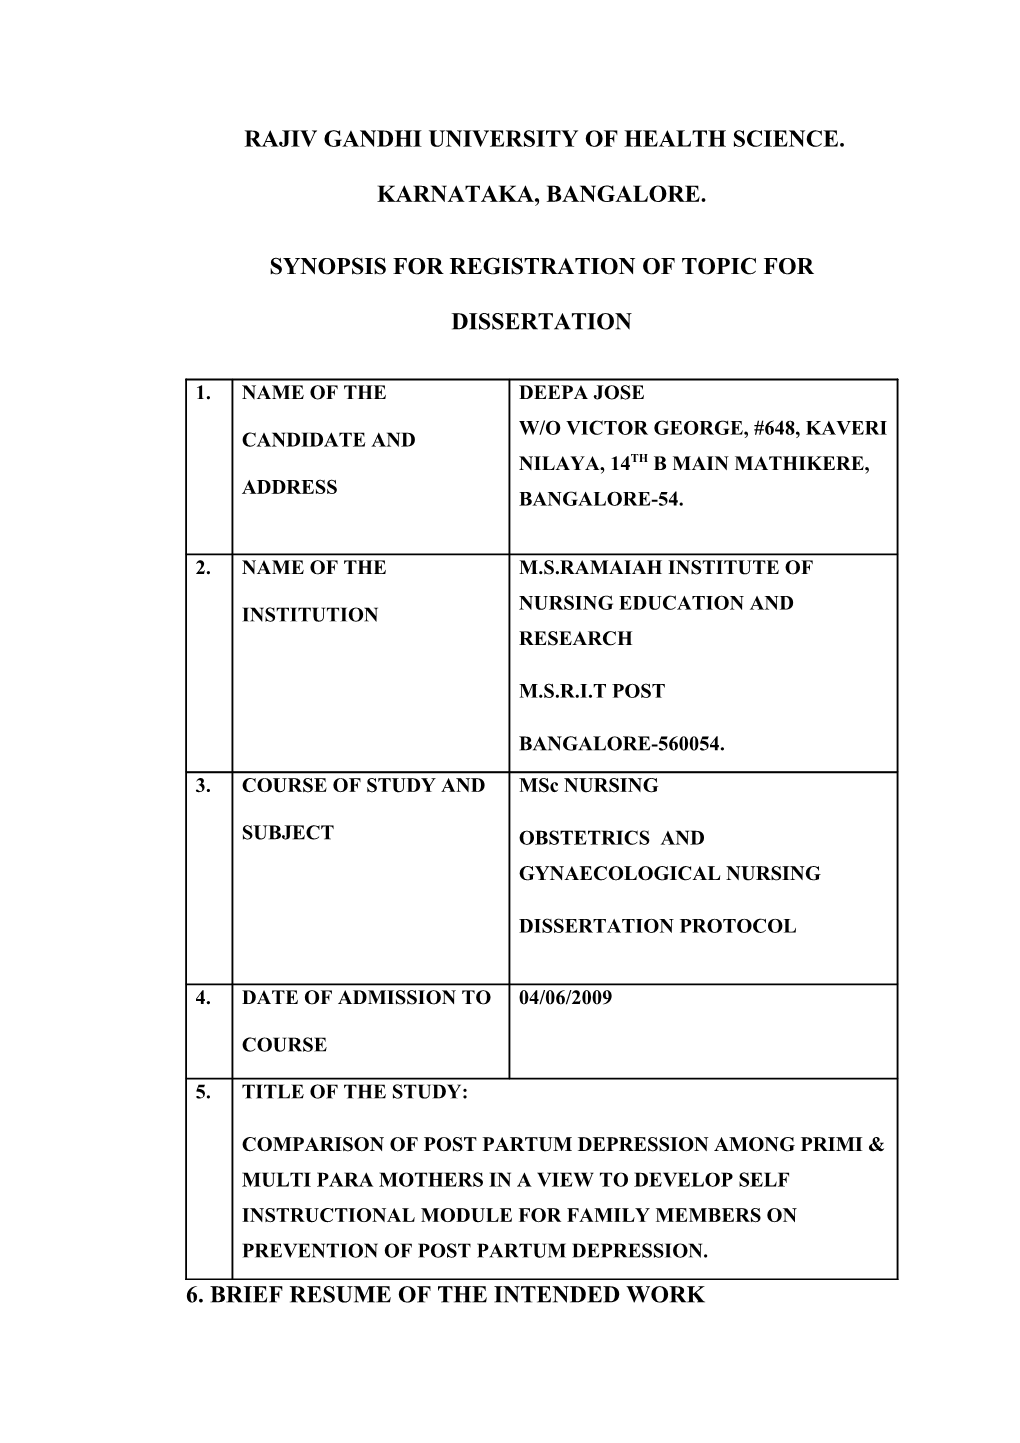 Synopsis for Registration of Topic for Dissertation